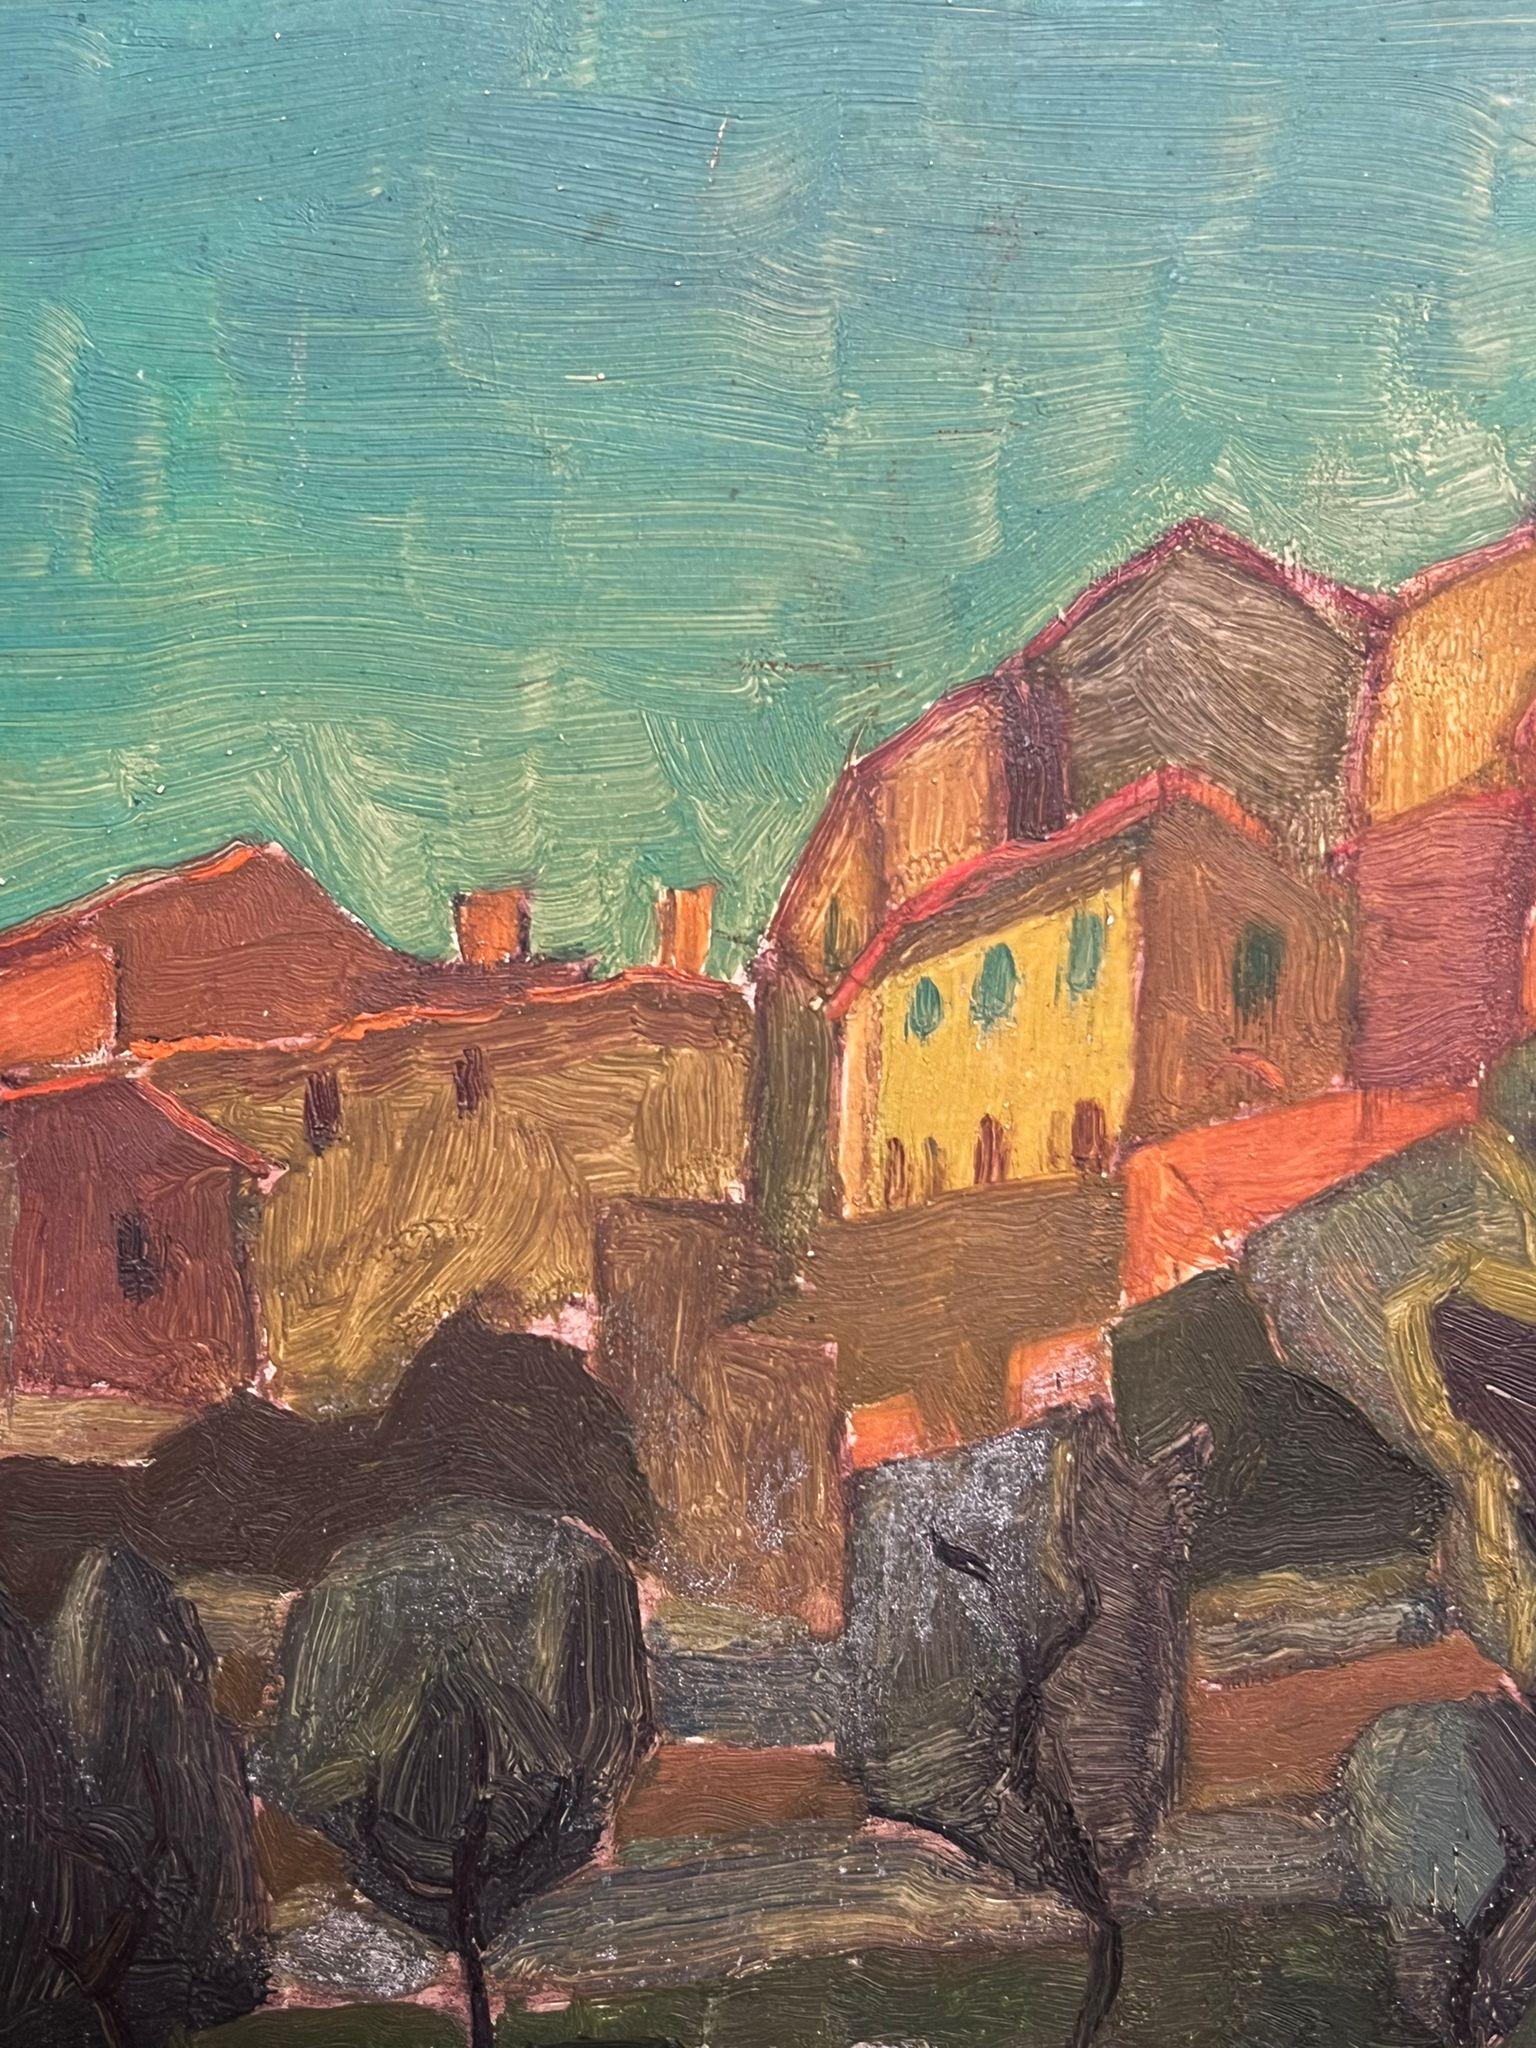 Provence
French Cubist artist, circa 1960's
oil on board, unframed
board: 9 x 10.5 inches
provenance: private collection, France
condition: very good and sound condition